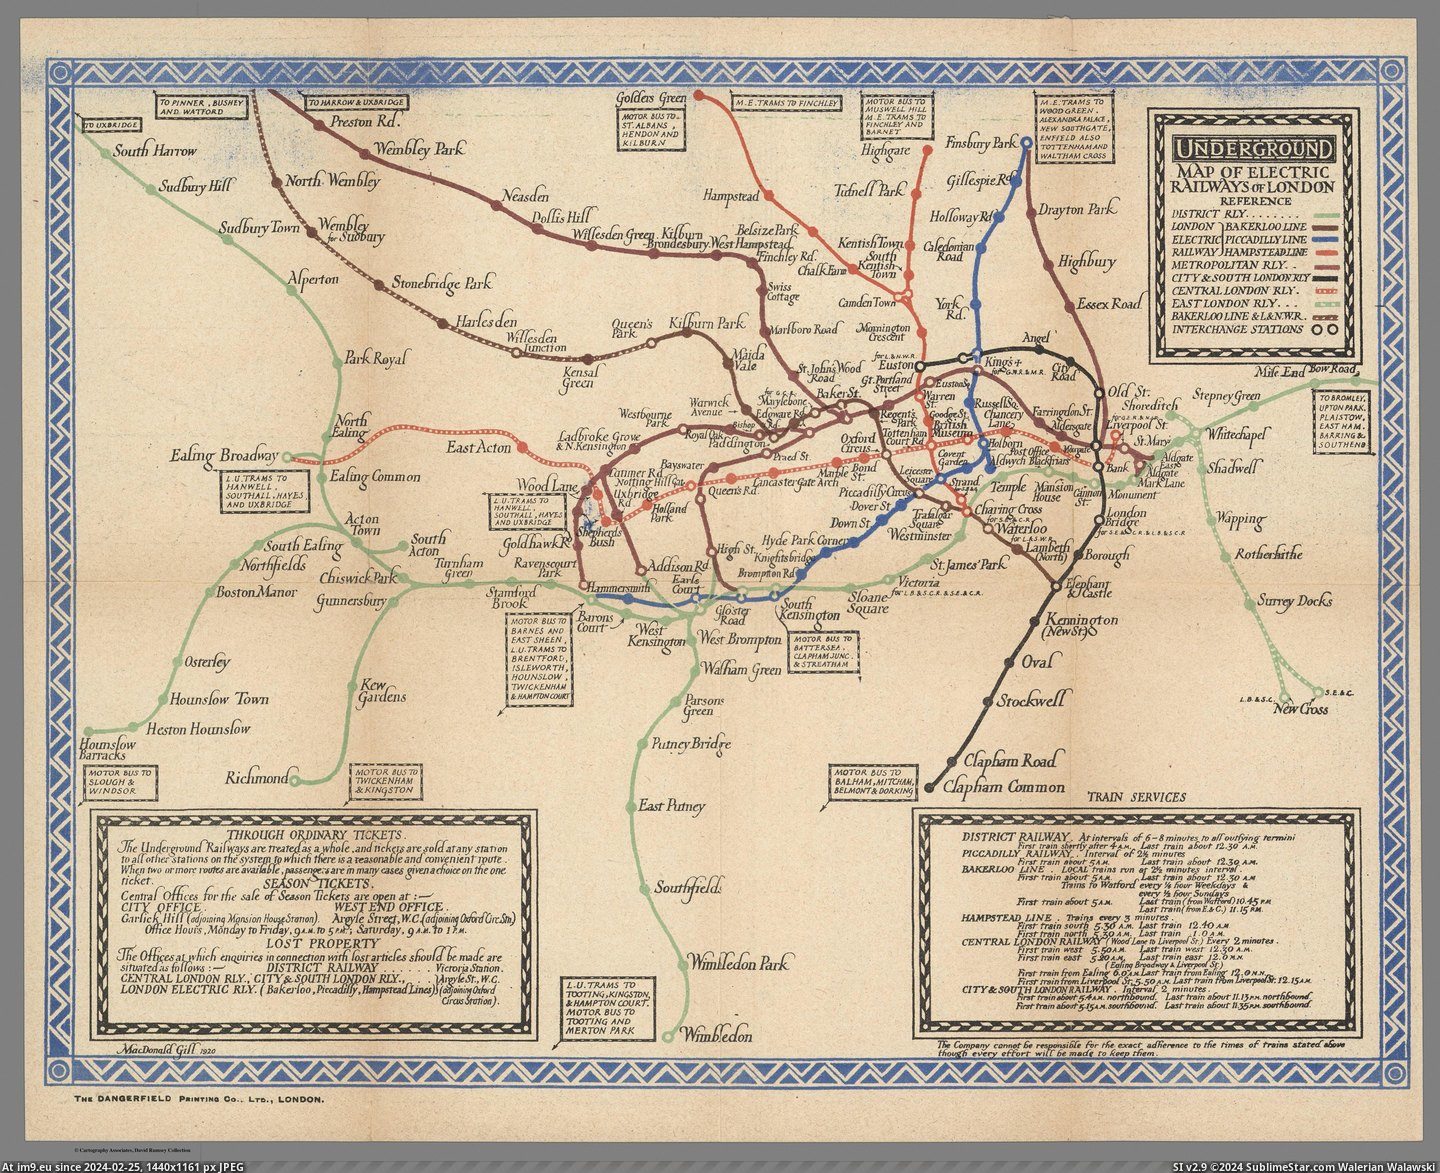 #London #Gill #Macdonald #Underground [Mapporn] The London Underground in 1920, made by L. MacDonald Gill [5590x4518] Pic. (Image of album My r/MAPS favs))